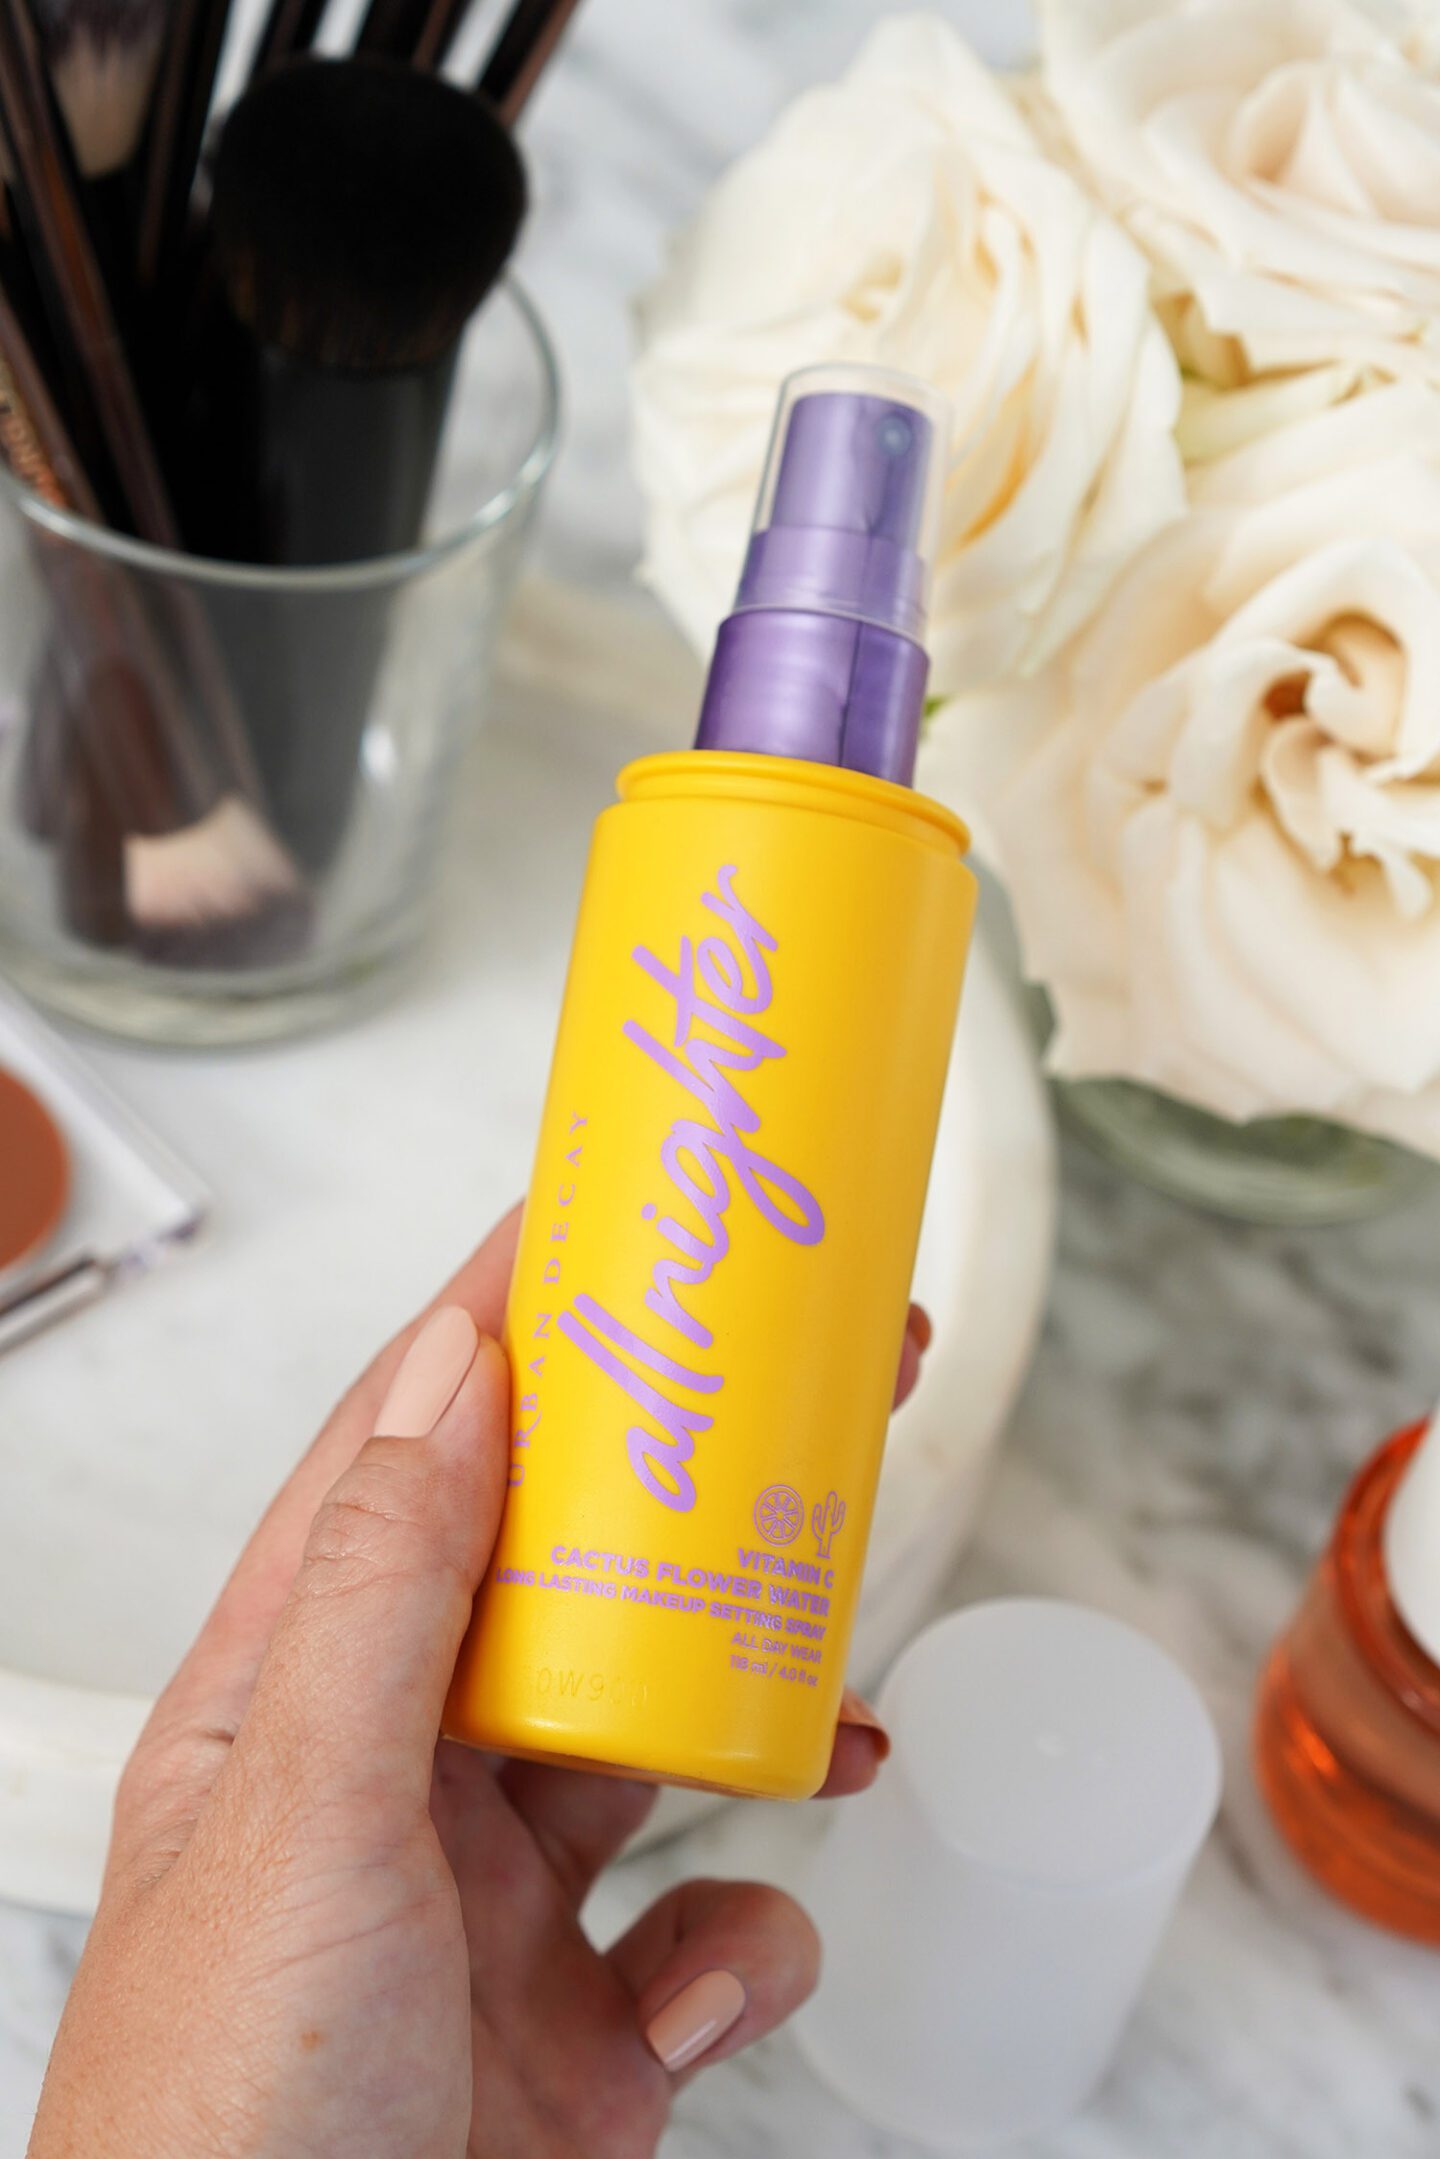 Urban Decay All Nighter Long-Lasting Makeup Setting Spray with Vitamin C